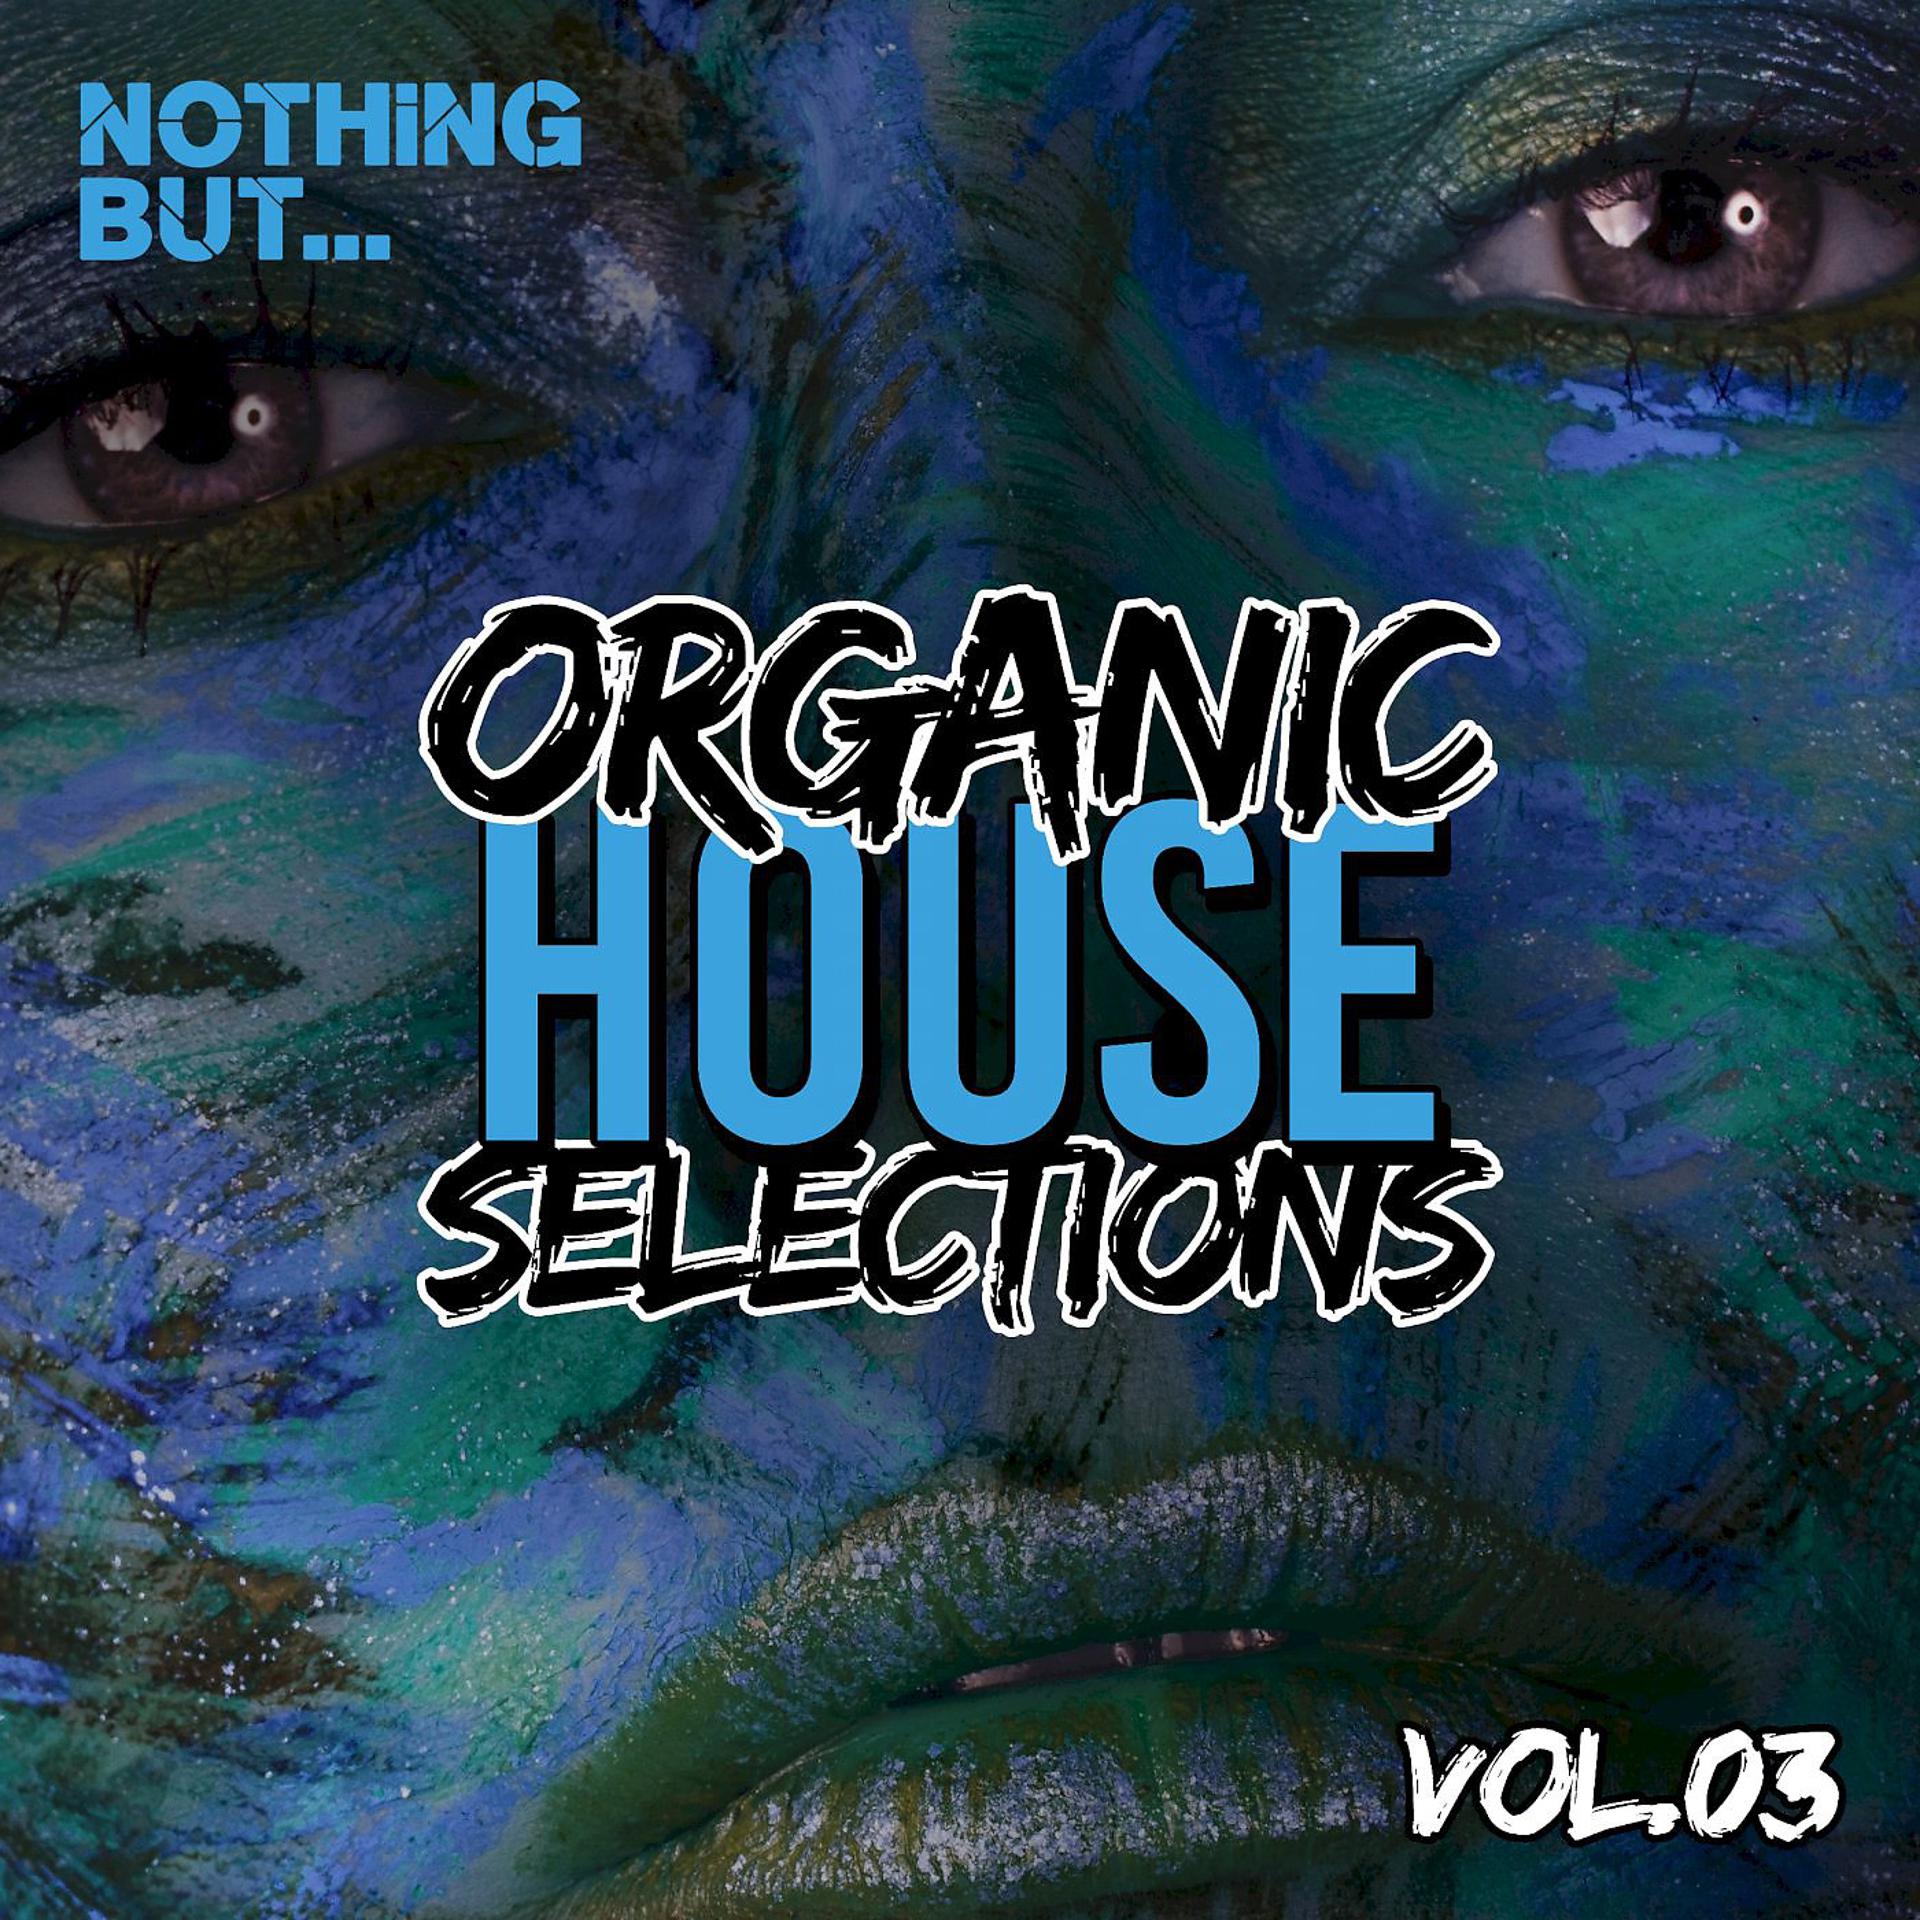 Постер альбома Nothing But... Organic House Selections, Vol. 03